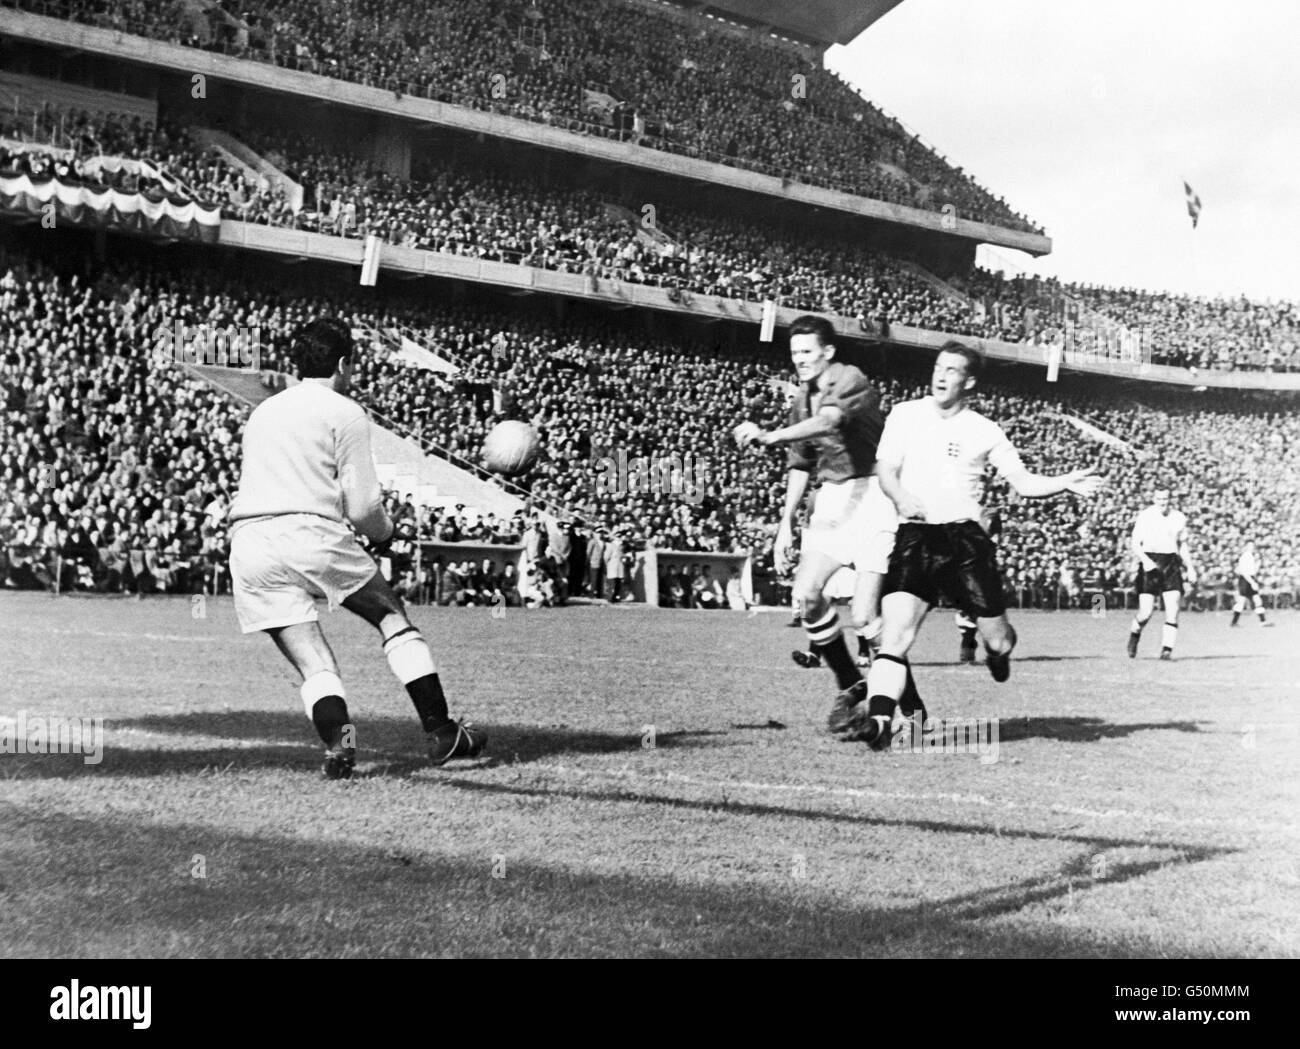 England's Nat Lofthouse sees his shot saved by Denmark goalkeeper Per Henriksen, watched by Denmark's Christen Brogger. Stock Photo